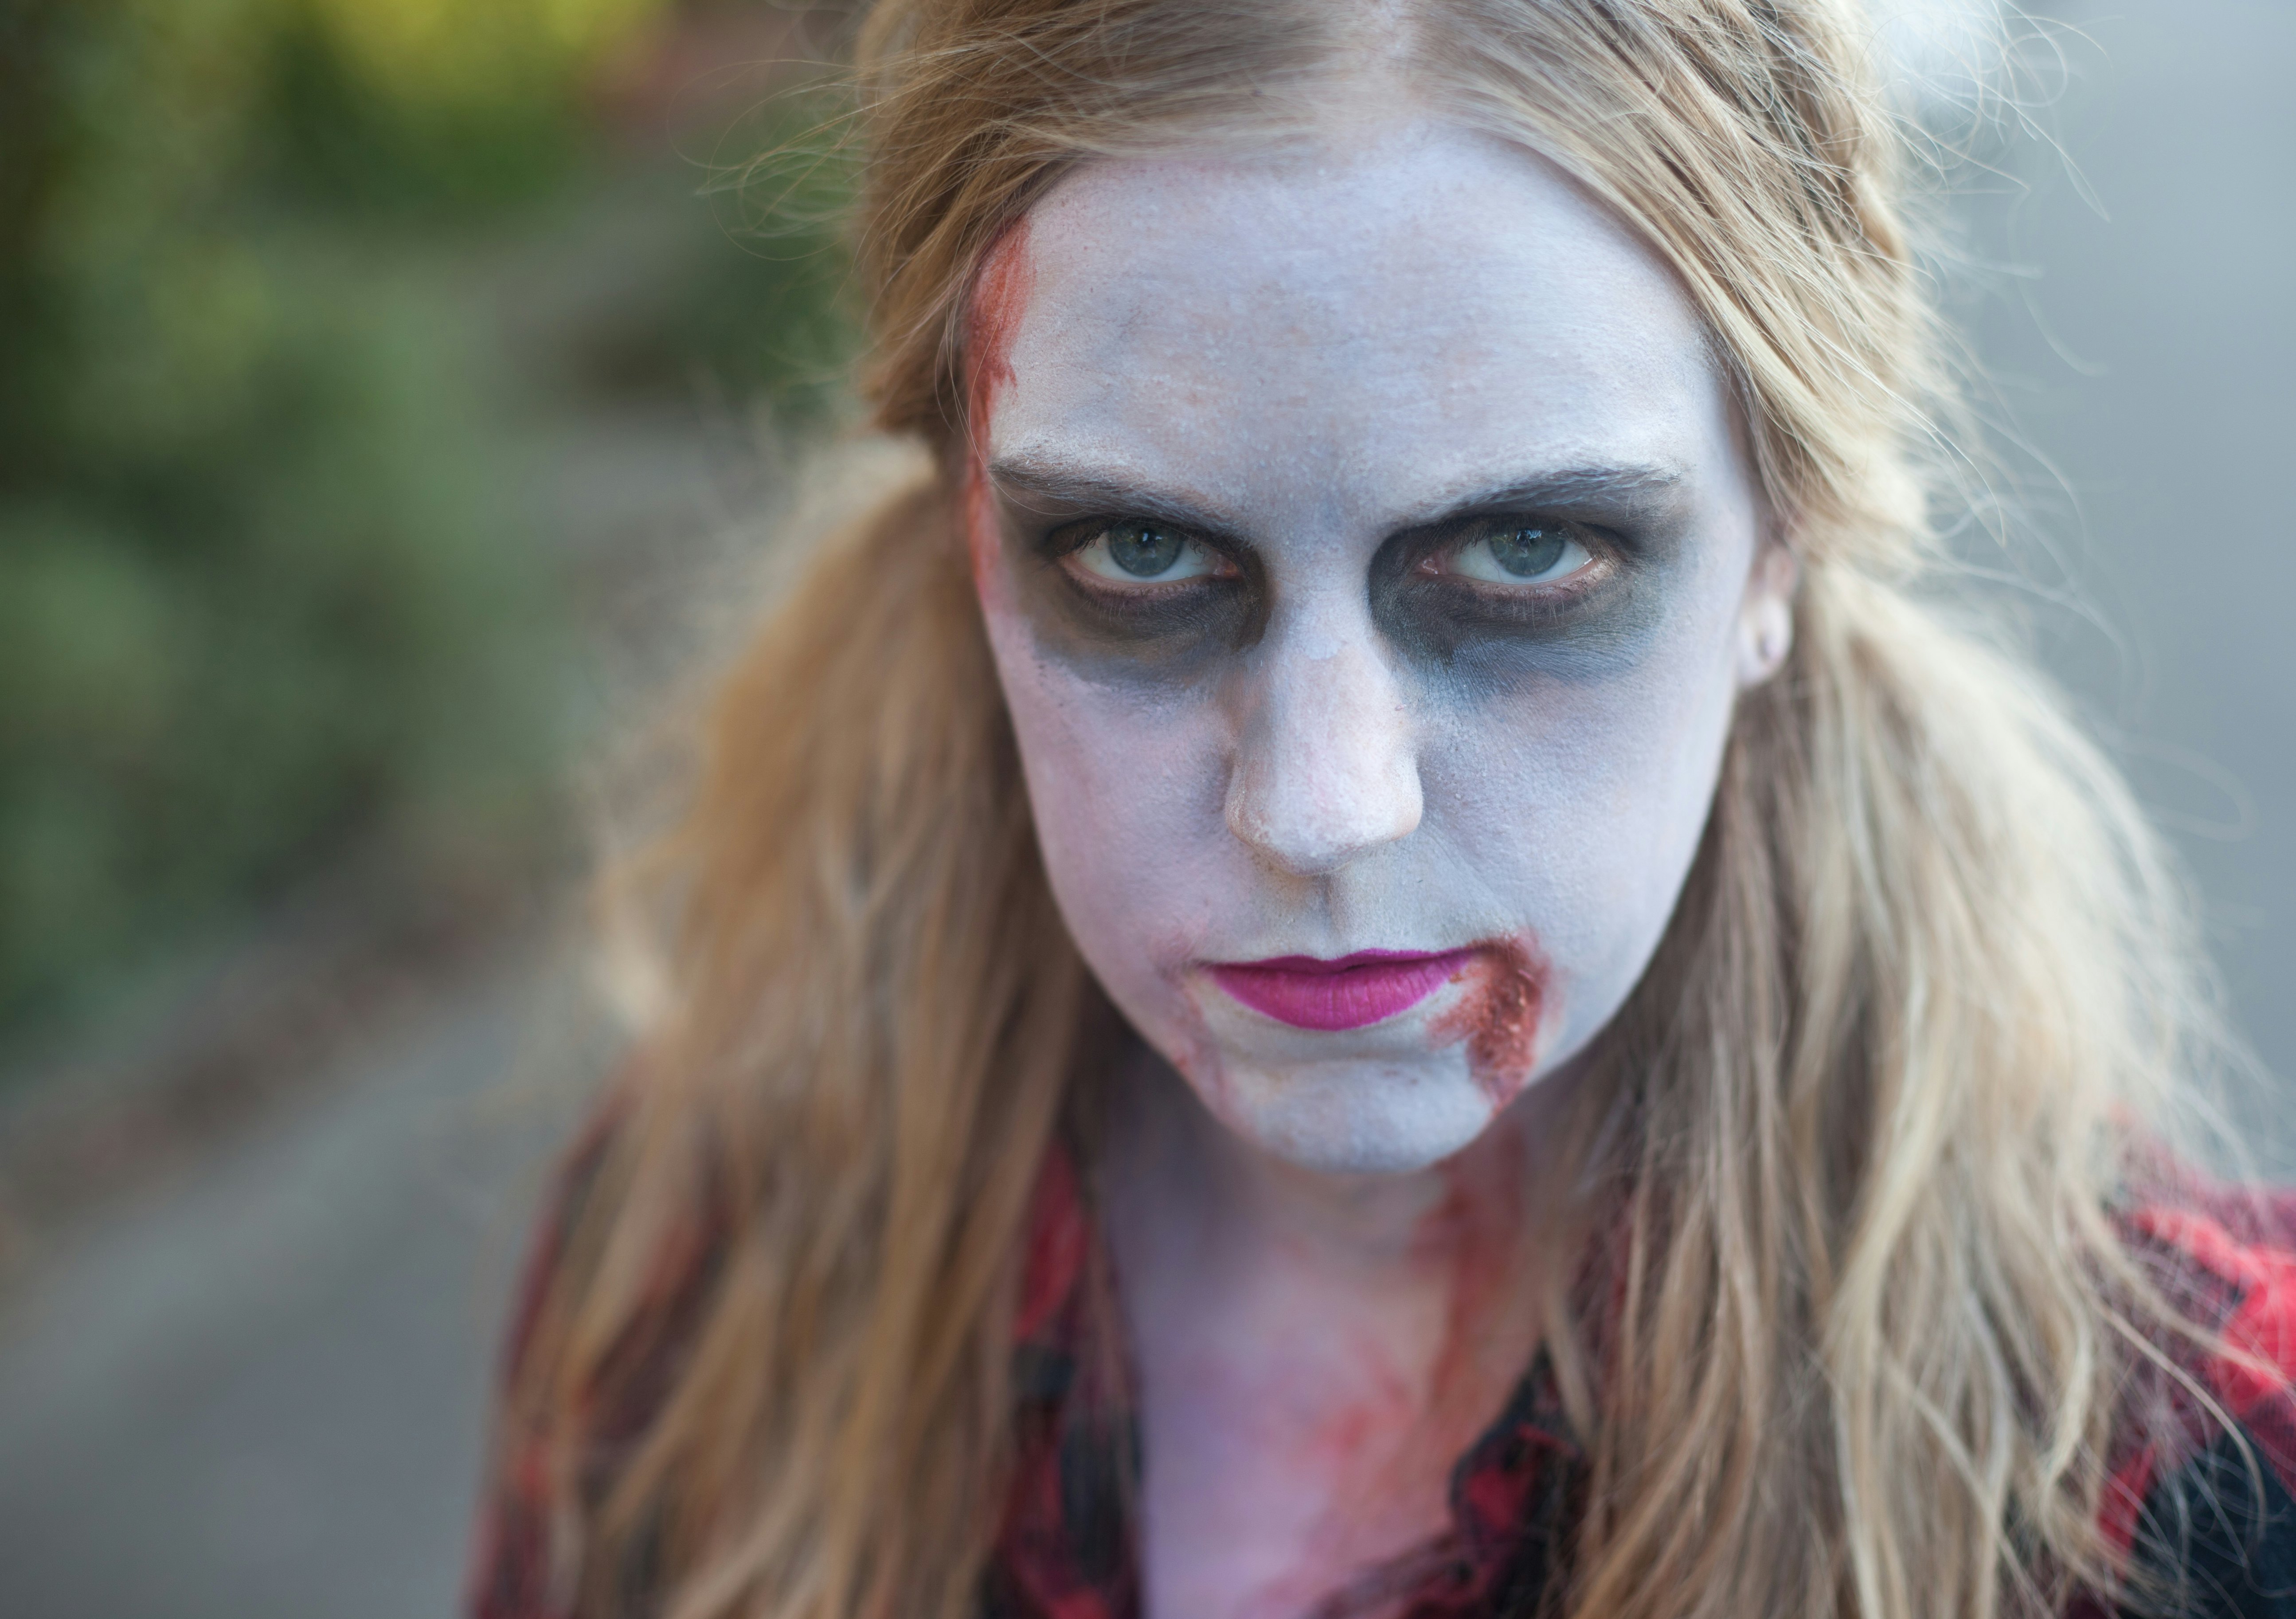 9 Easy Halloween Makeup Ideas From Zombies To Sexy Vampires To